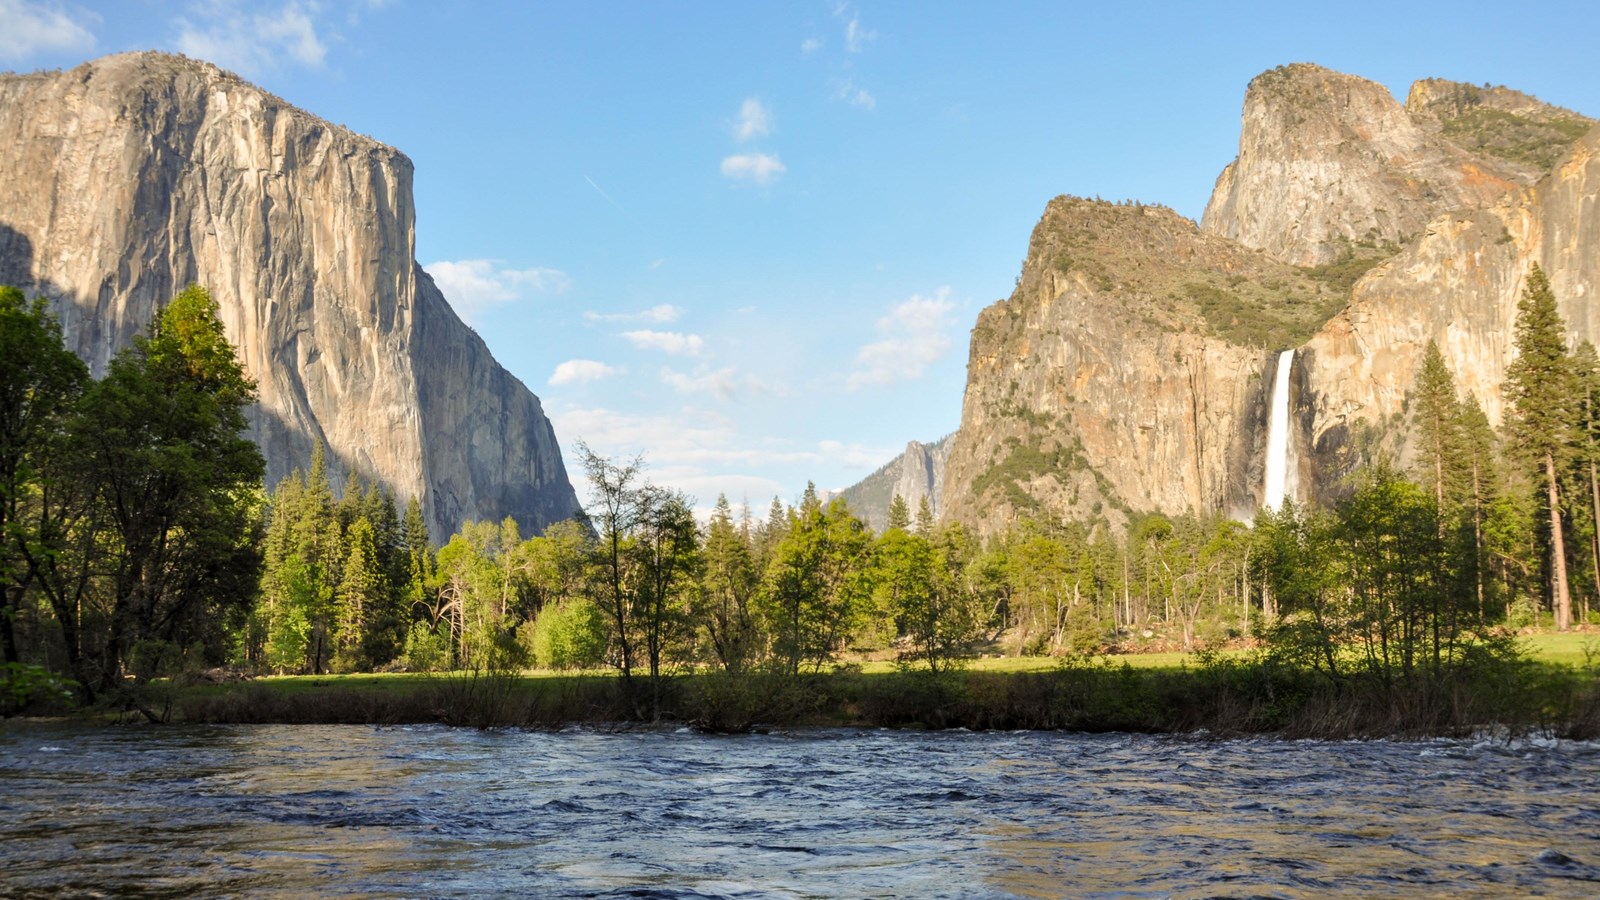 View of El Capitan on the left, the river in the foreground, and Bridalveil Fall on the right